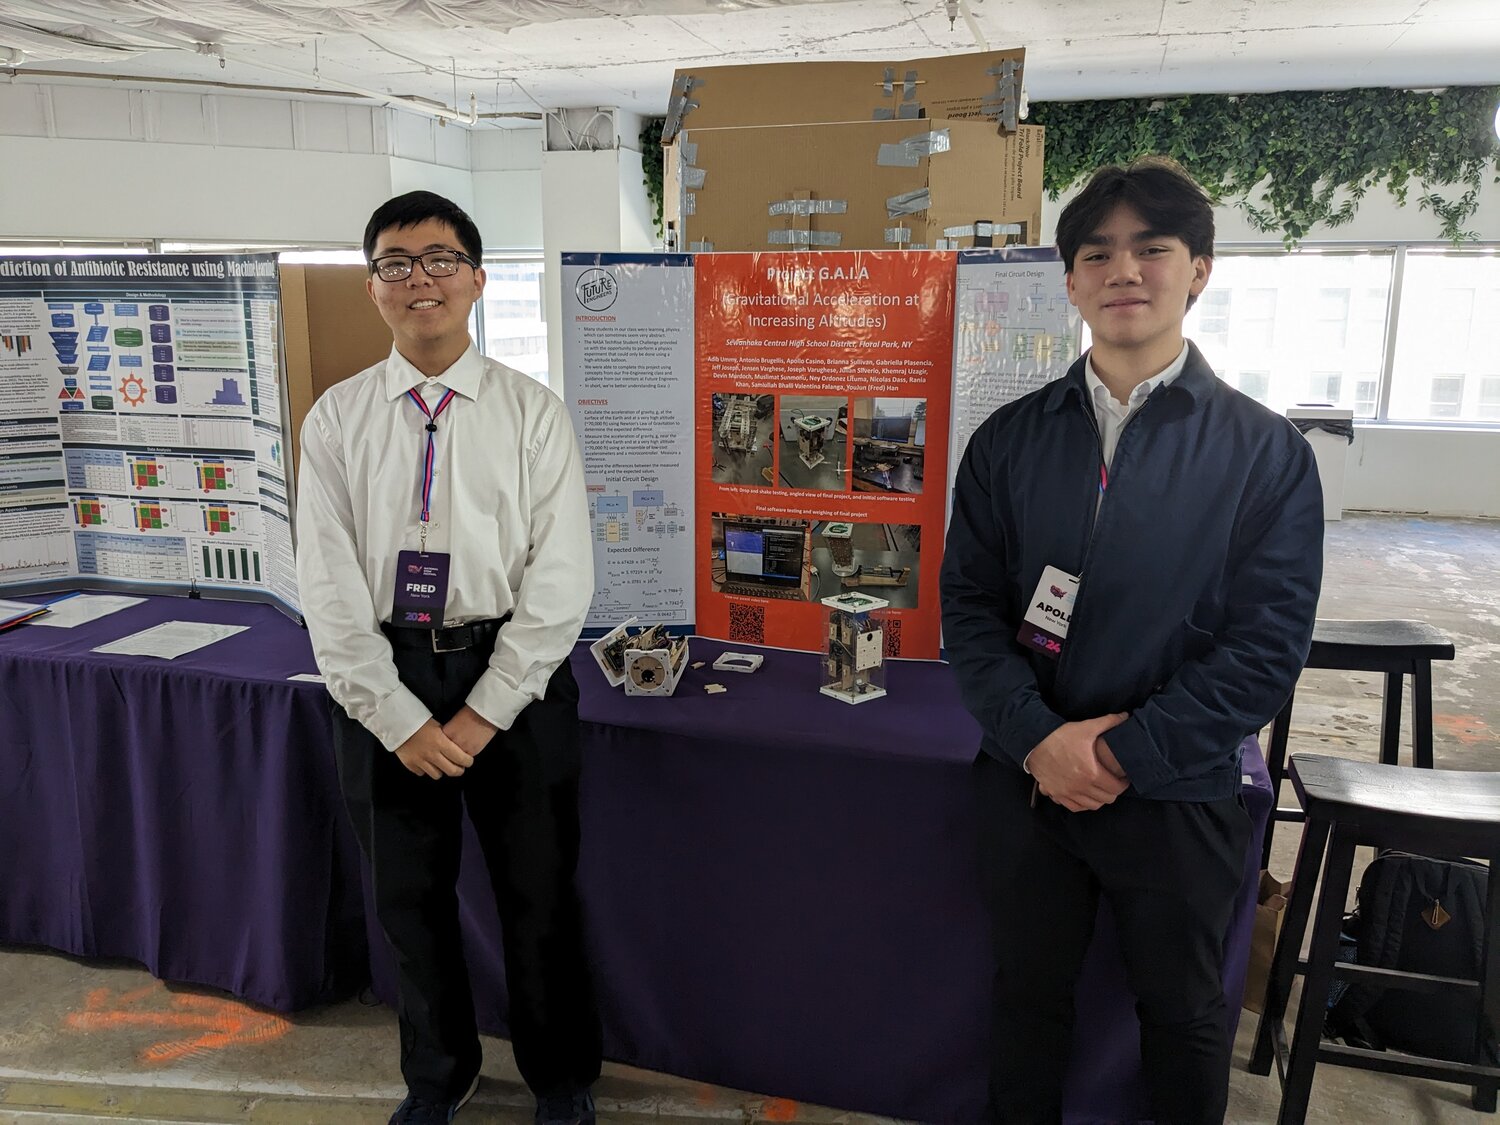 Floral Park Memorial High School student Appolo Casino and New Hyde Park Memorial High School student Fred Han present at the first annual National STEM Festival in Washington, D.C., from April 11-13.